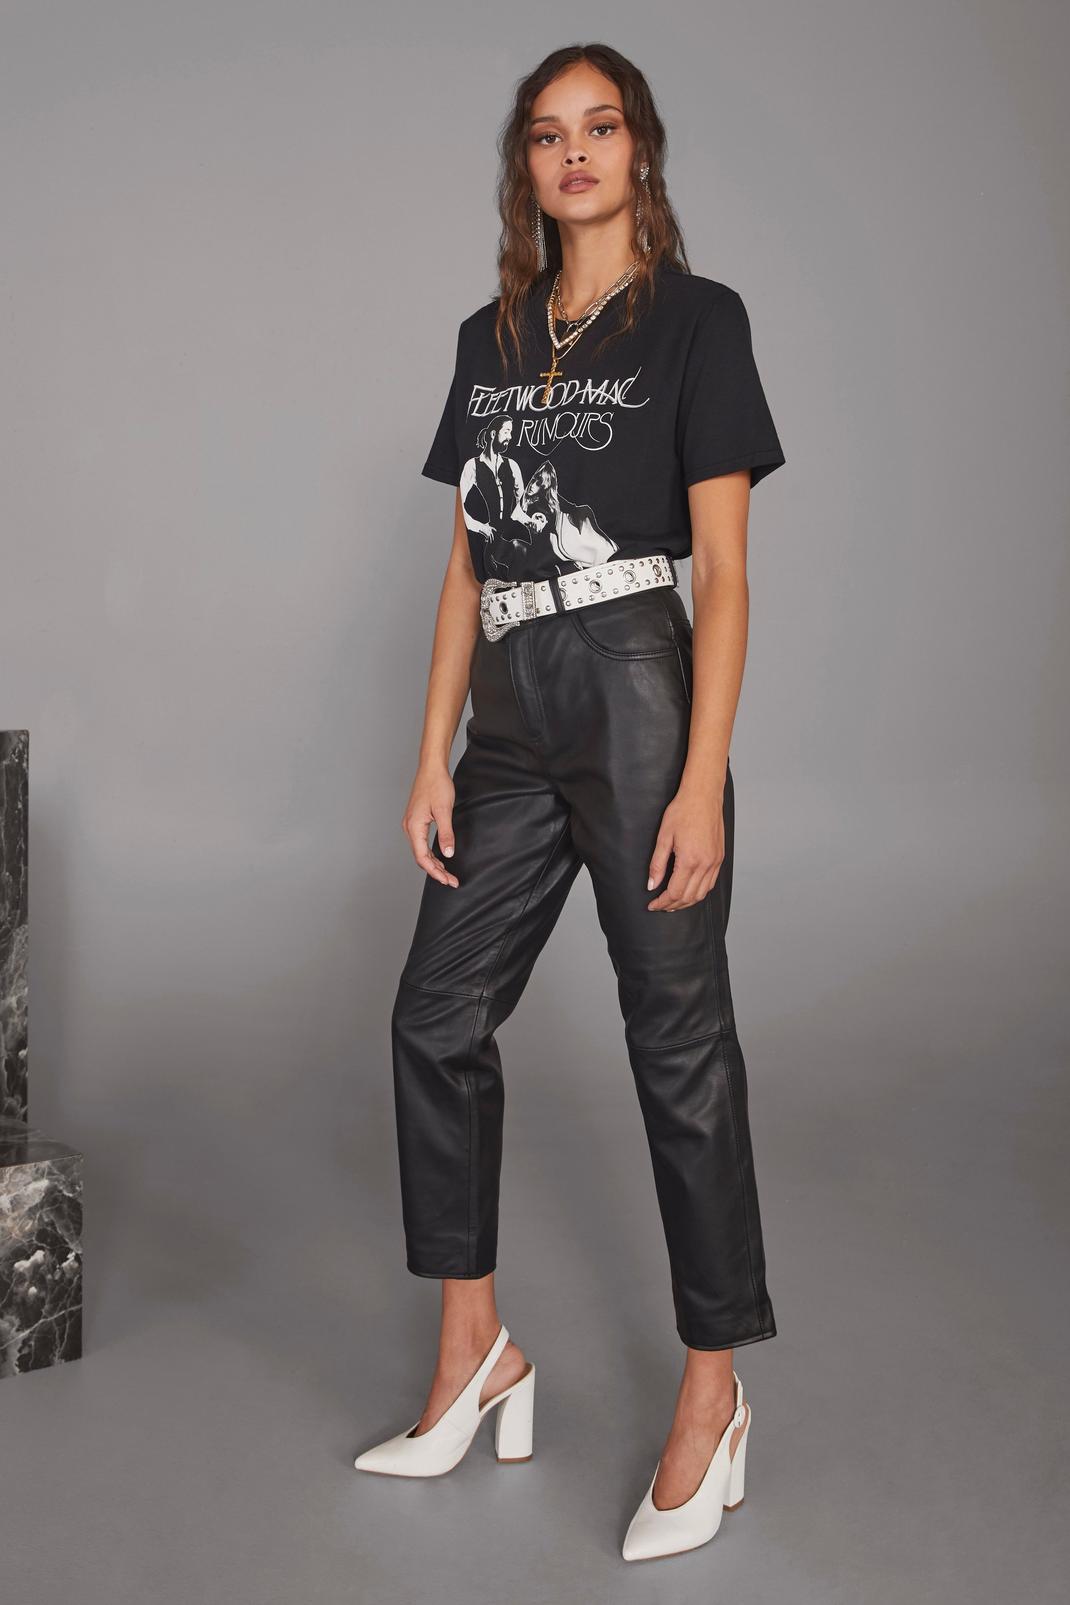 Get Together Leather Straight-Leg Pants